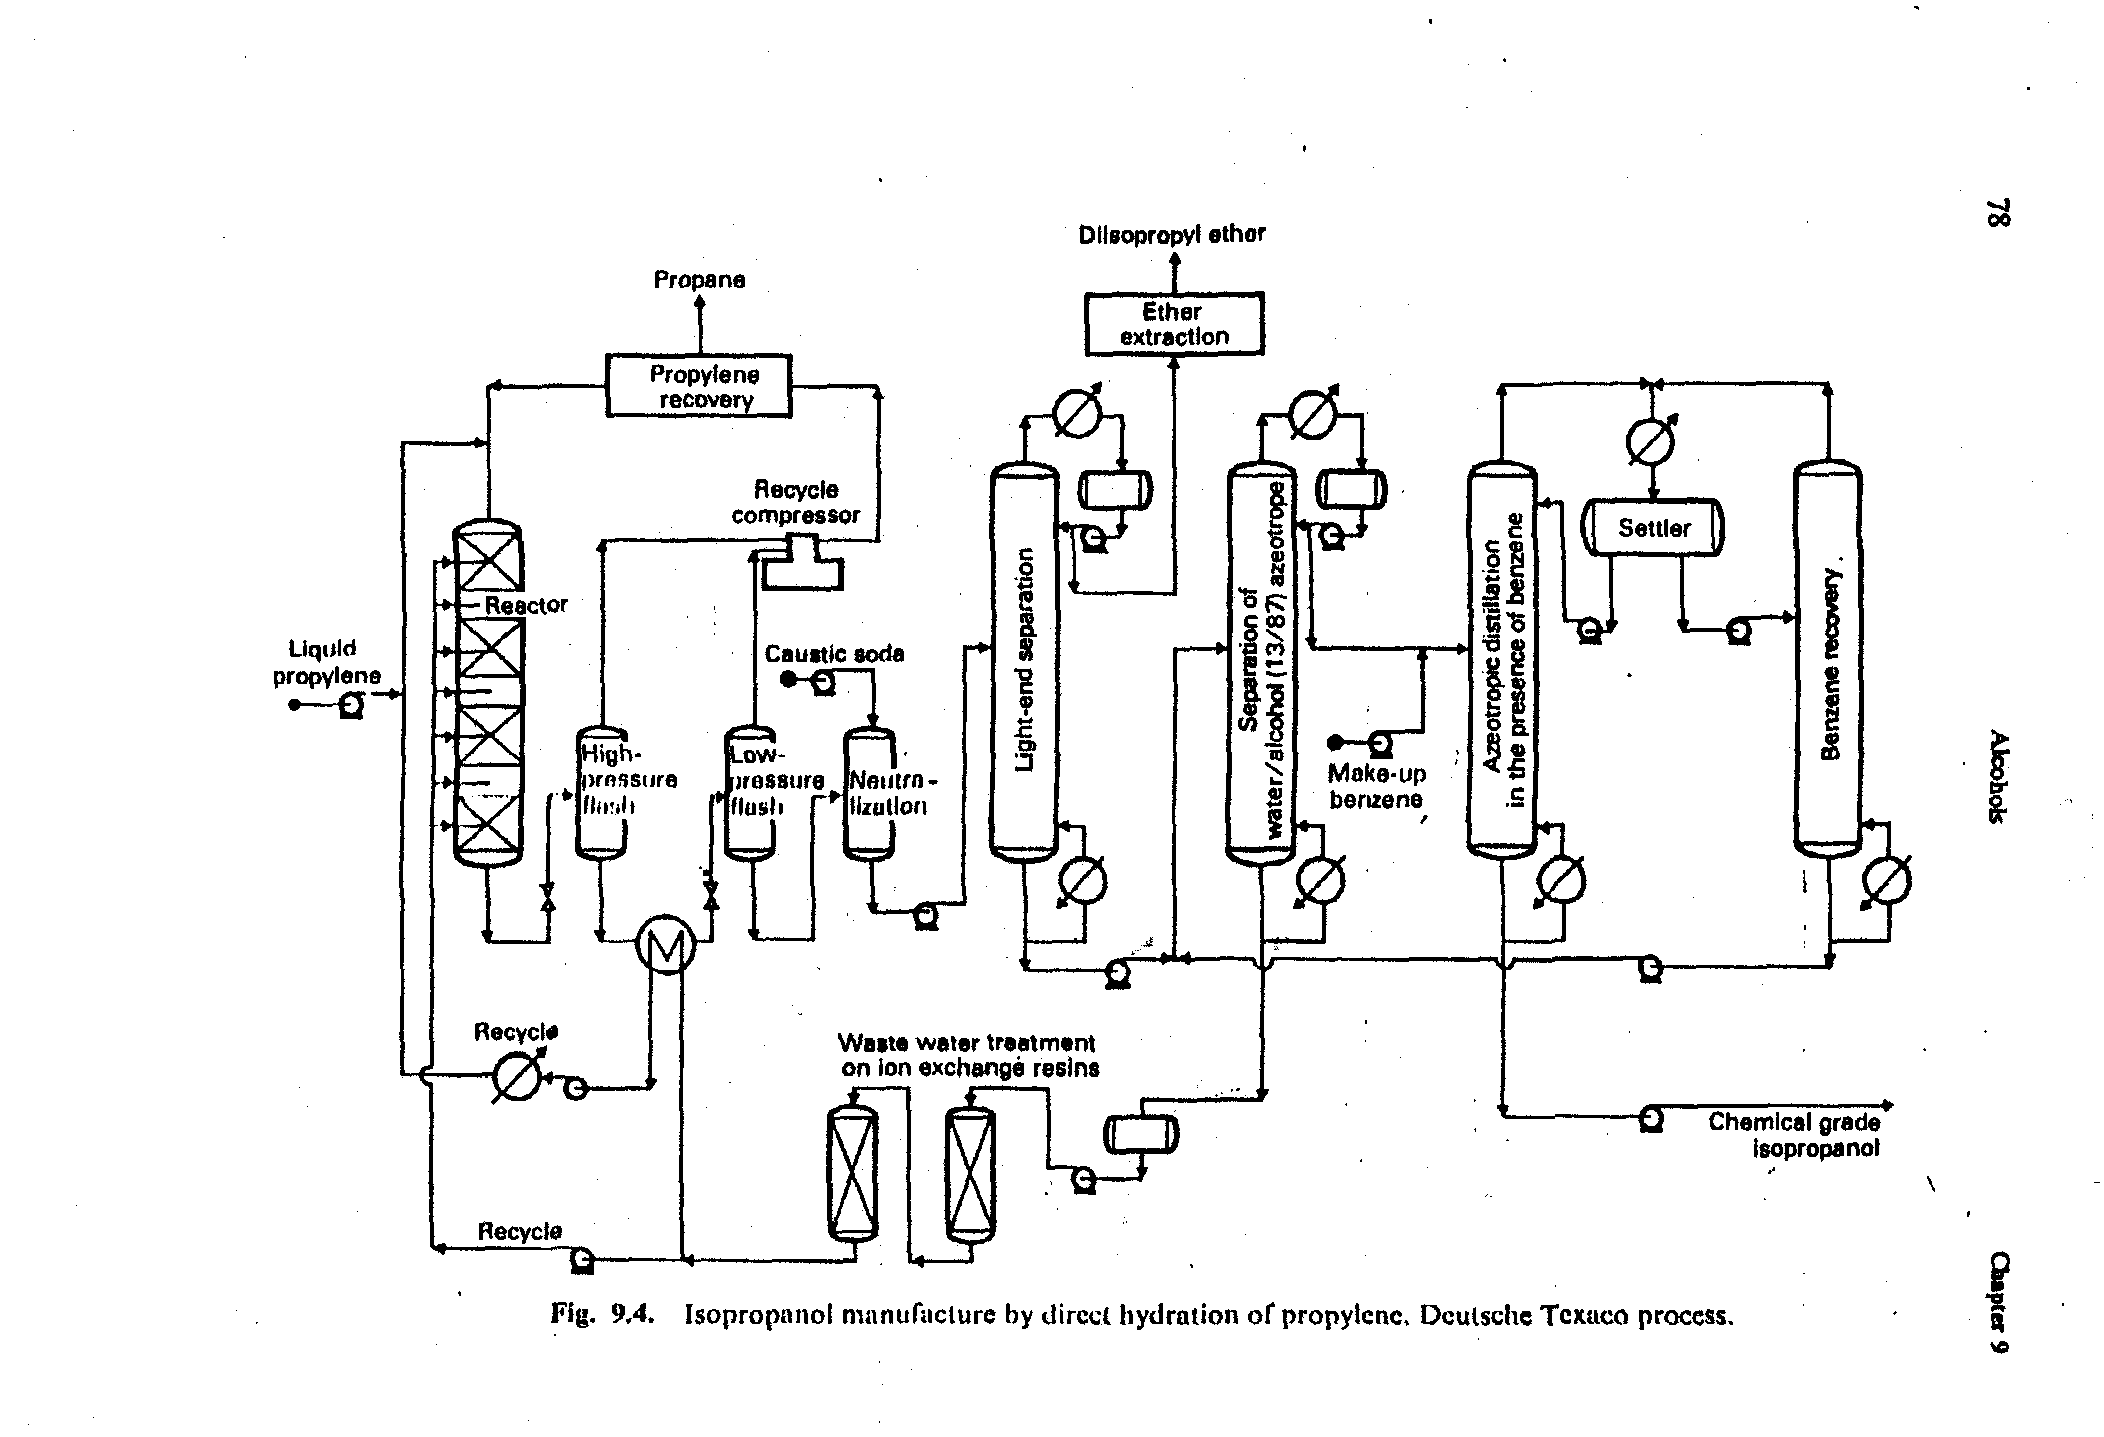 Fig. 9,4. Isopropanol manufacture by direct hydration of propylene. Deutsche Texaco process.